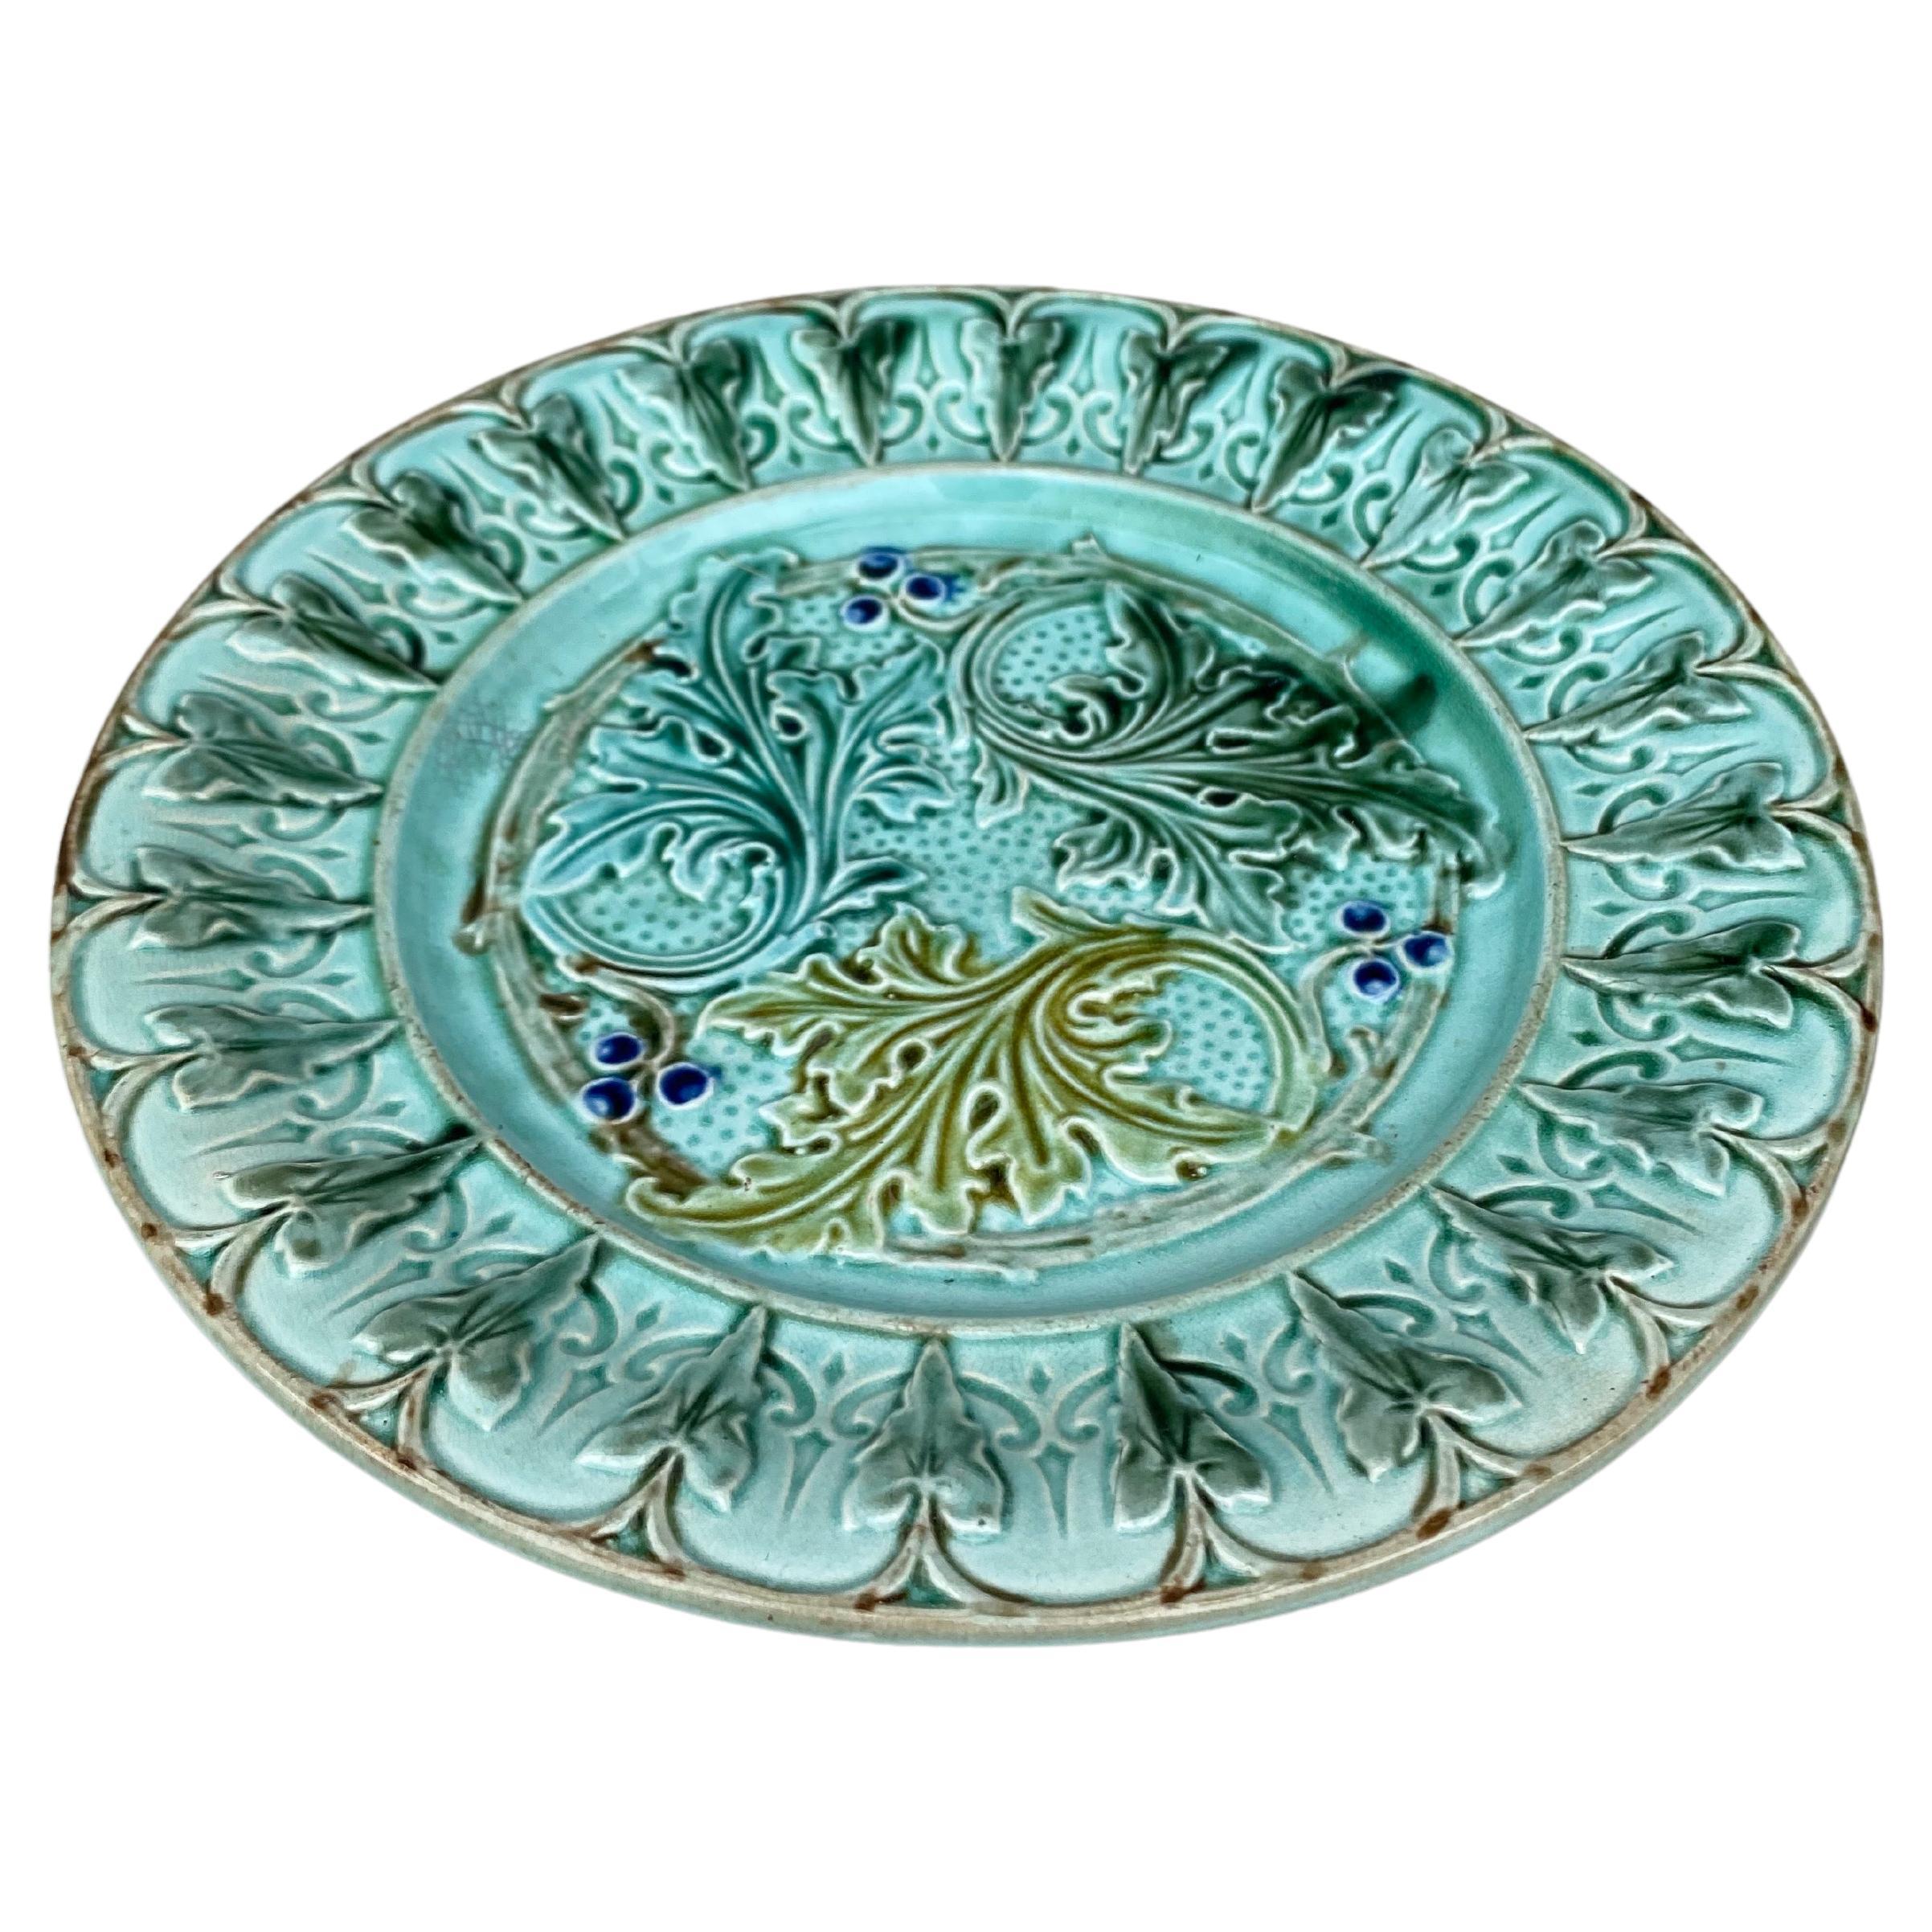 French Majolica acanthus leaves plates, circa 1880.